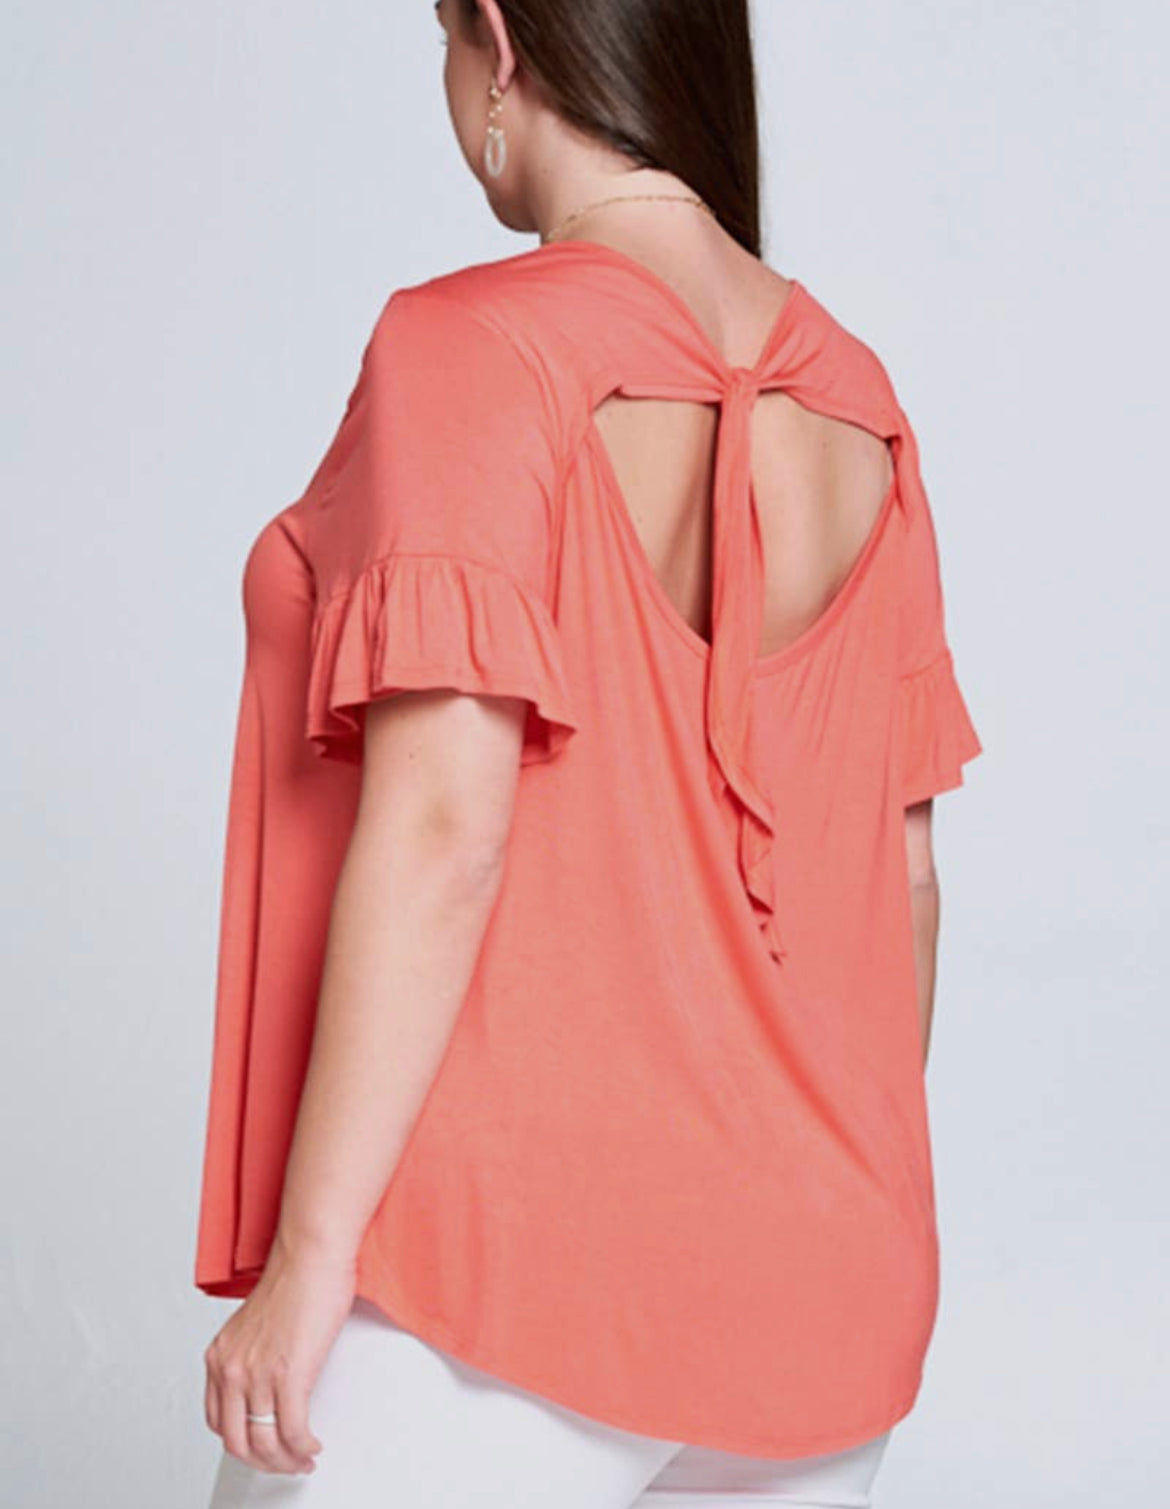 Coral Open Back Bow Top